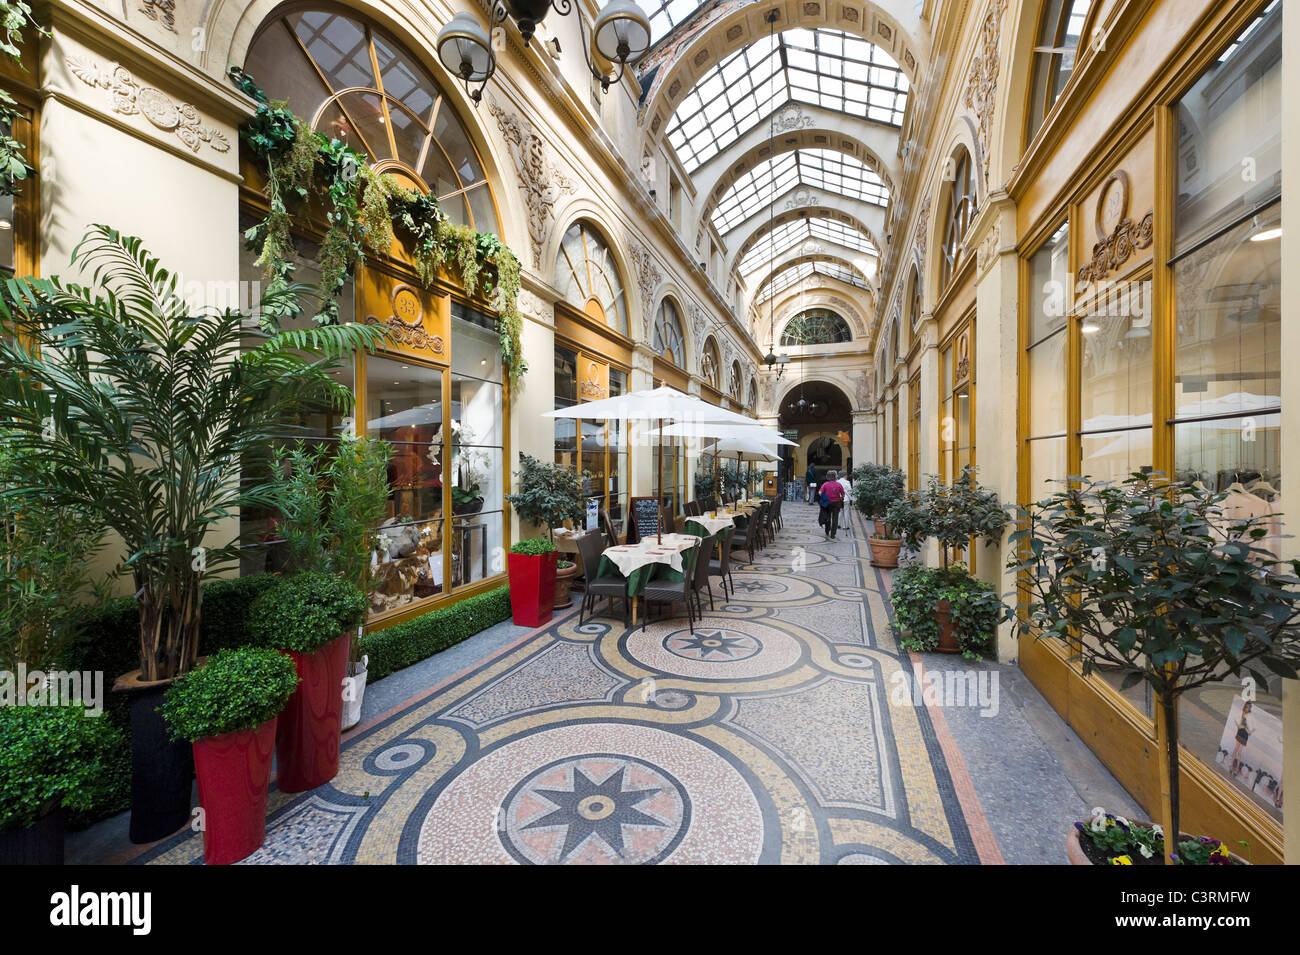 Shops and cafe in the Galerie Vivienne in the 2nd Arrondissement, Paris, France Stock Photo